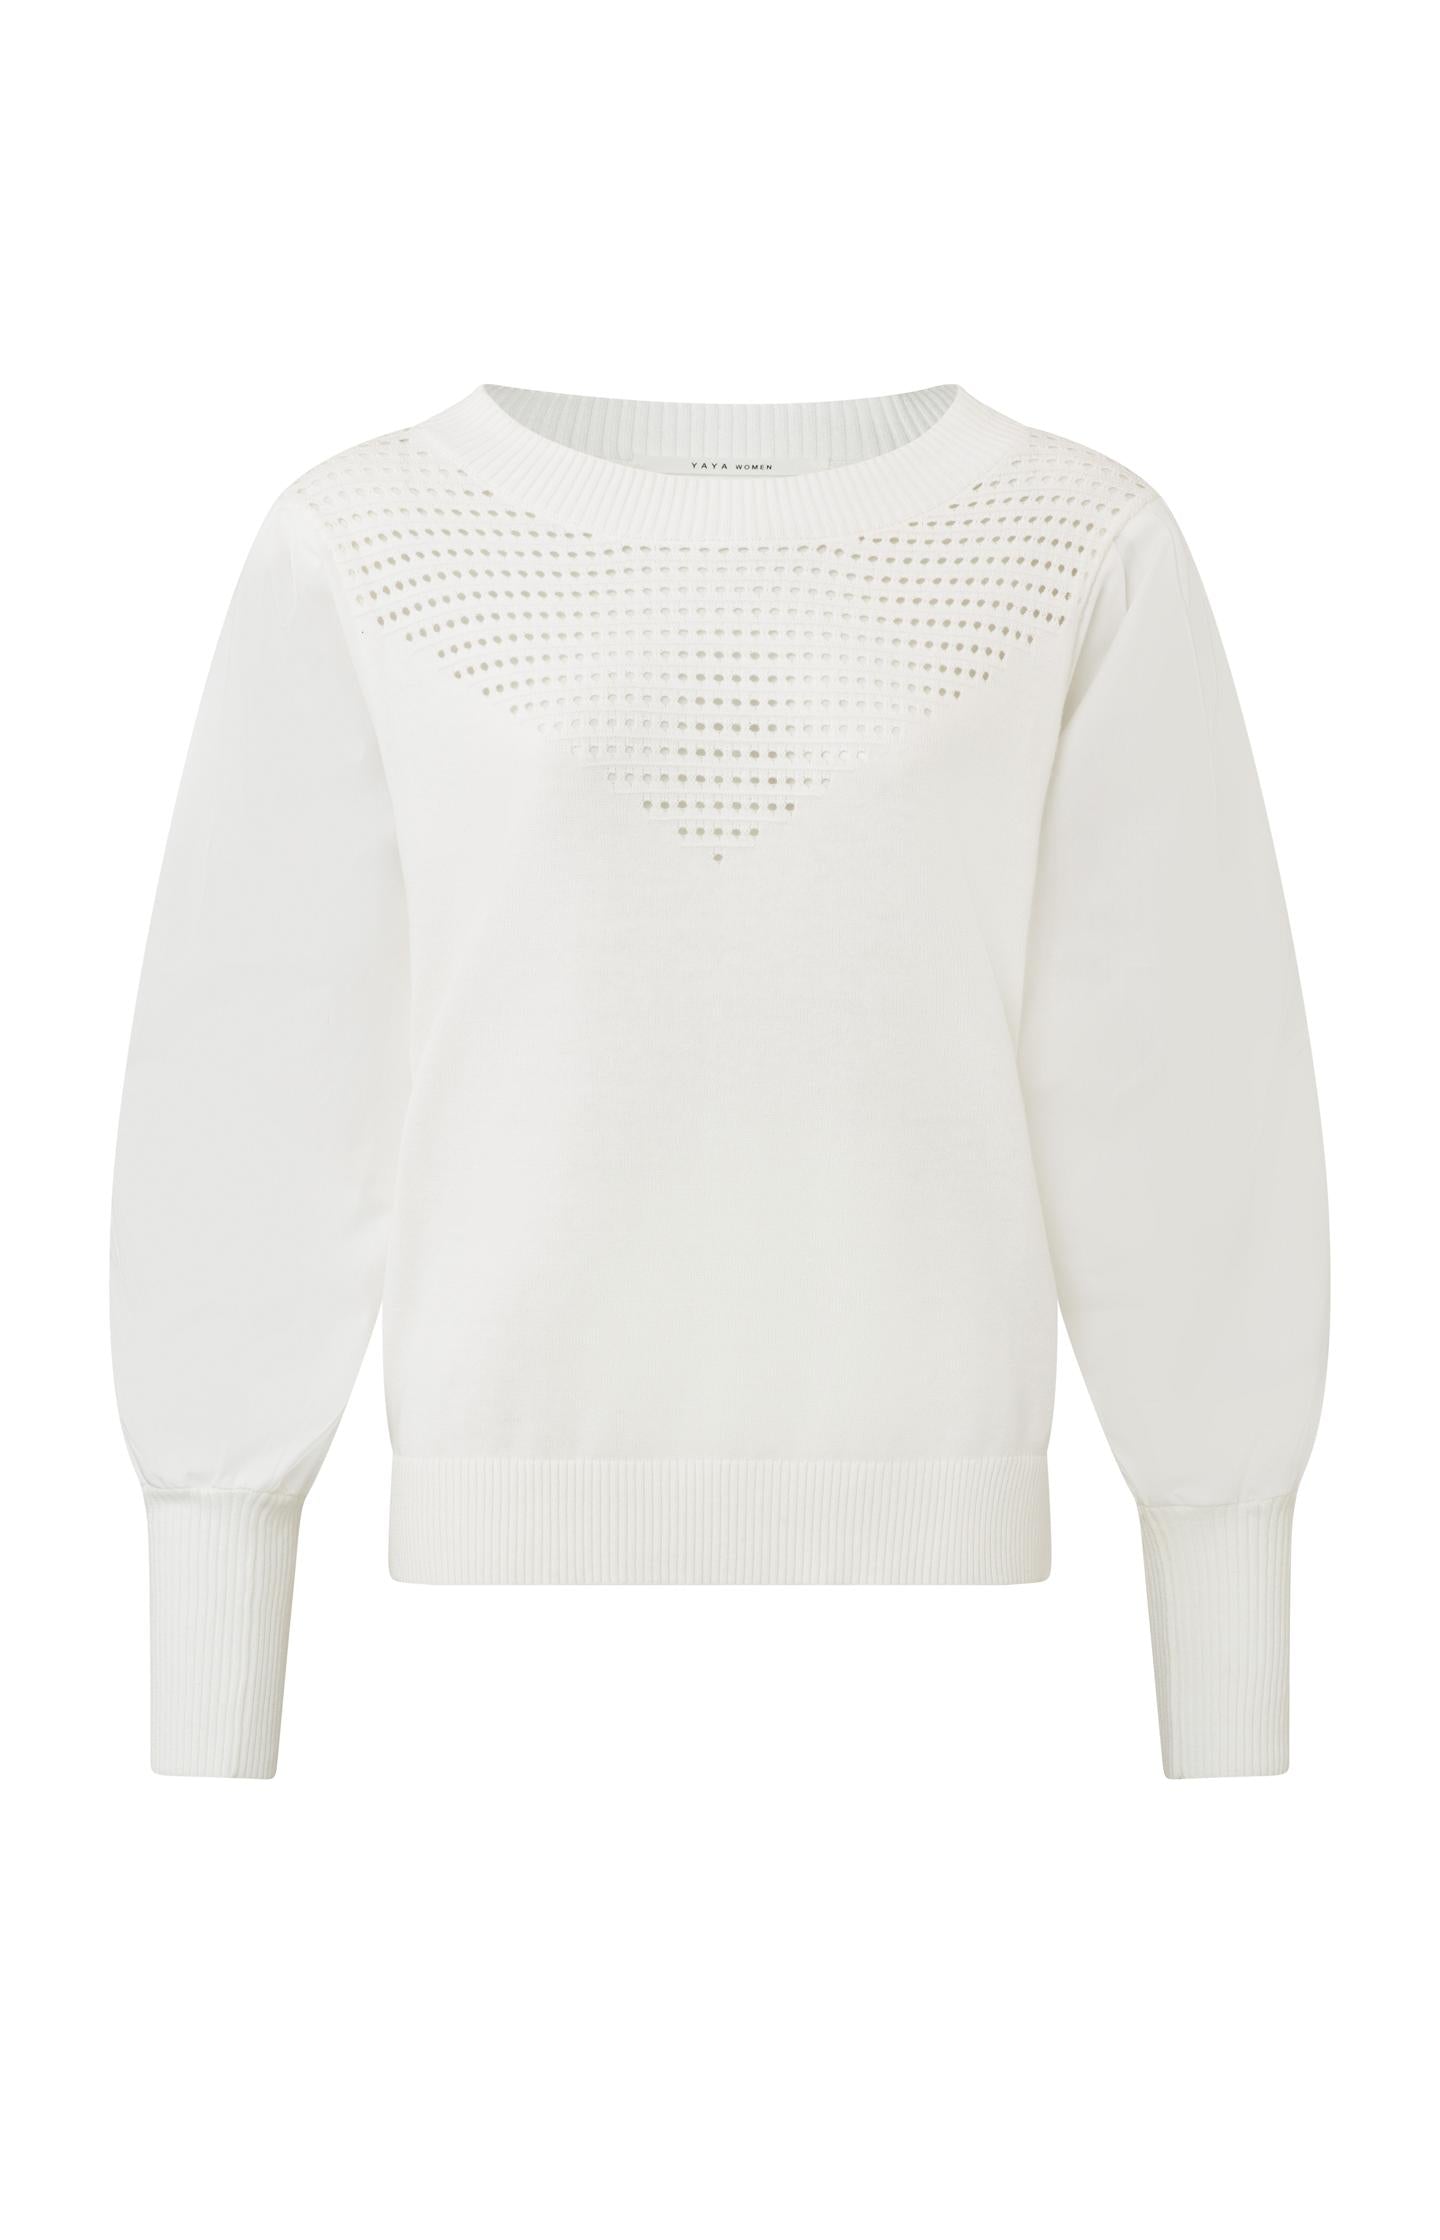 Pointelle sweater with round neck and long puffed sleeves - Type: product